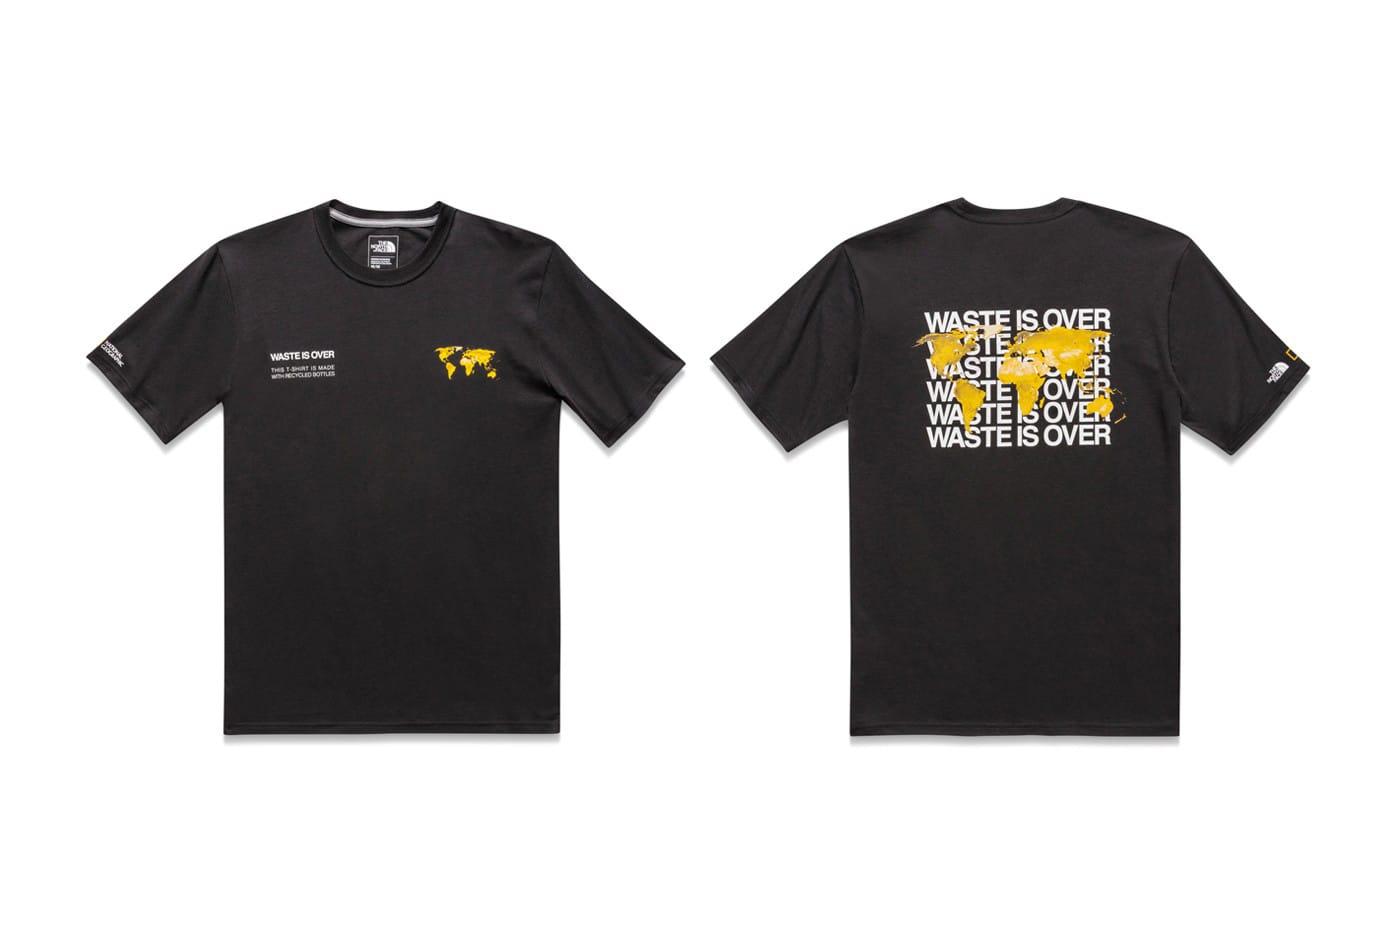 the north face national geographic t shirt